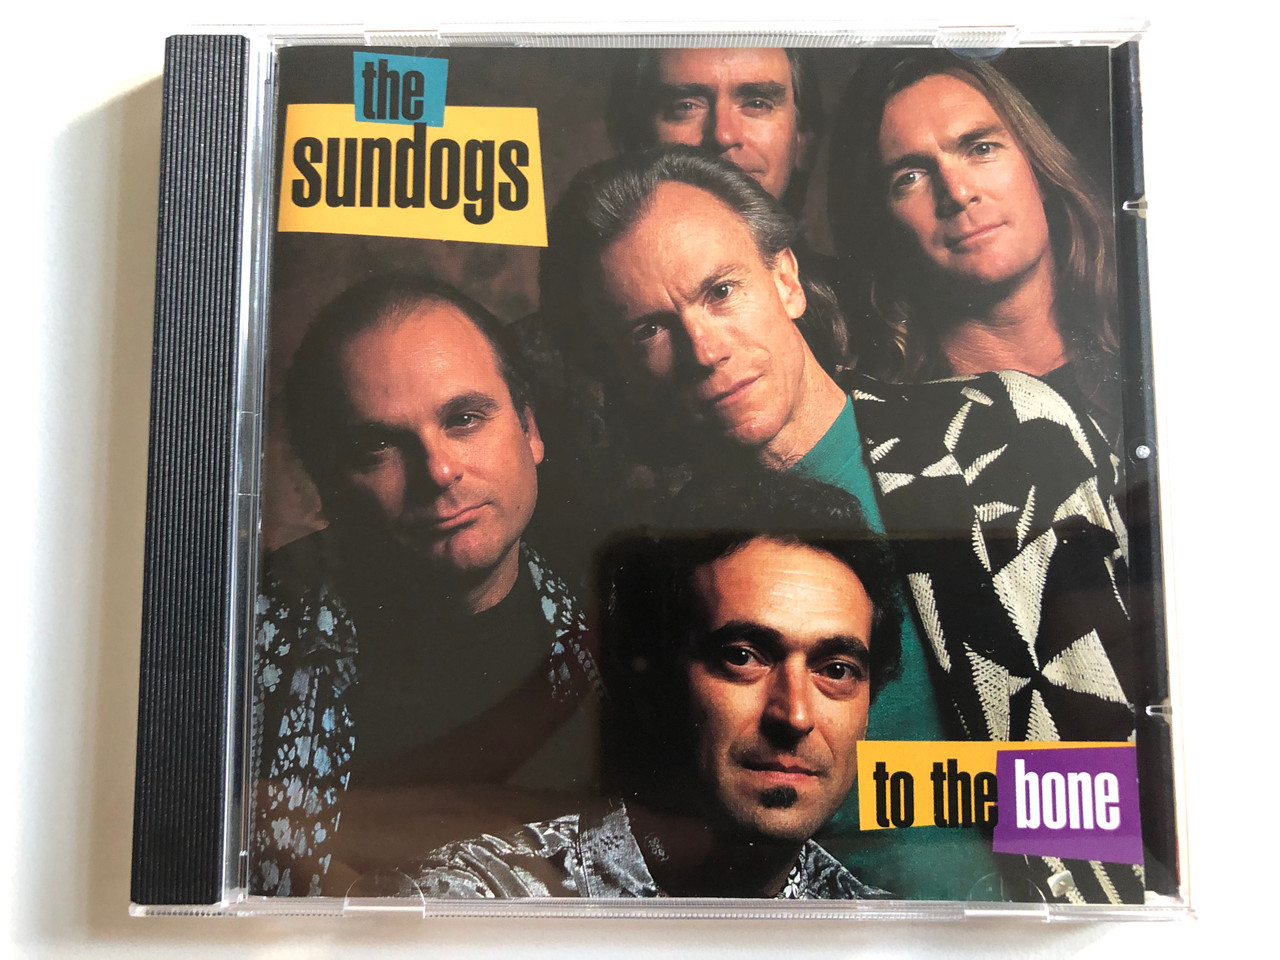 https://cdn10.bigcommerce.com/s-62bdpkt7pb/products/0/images/313859/The_Sundogs_To_The_Bone_Rounder_Records_Audio_CD_1994_CD_9044_1__59675.1701091547.1280.1280.JPG?c=2